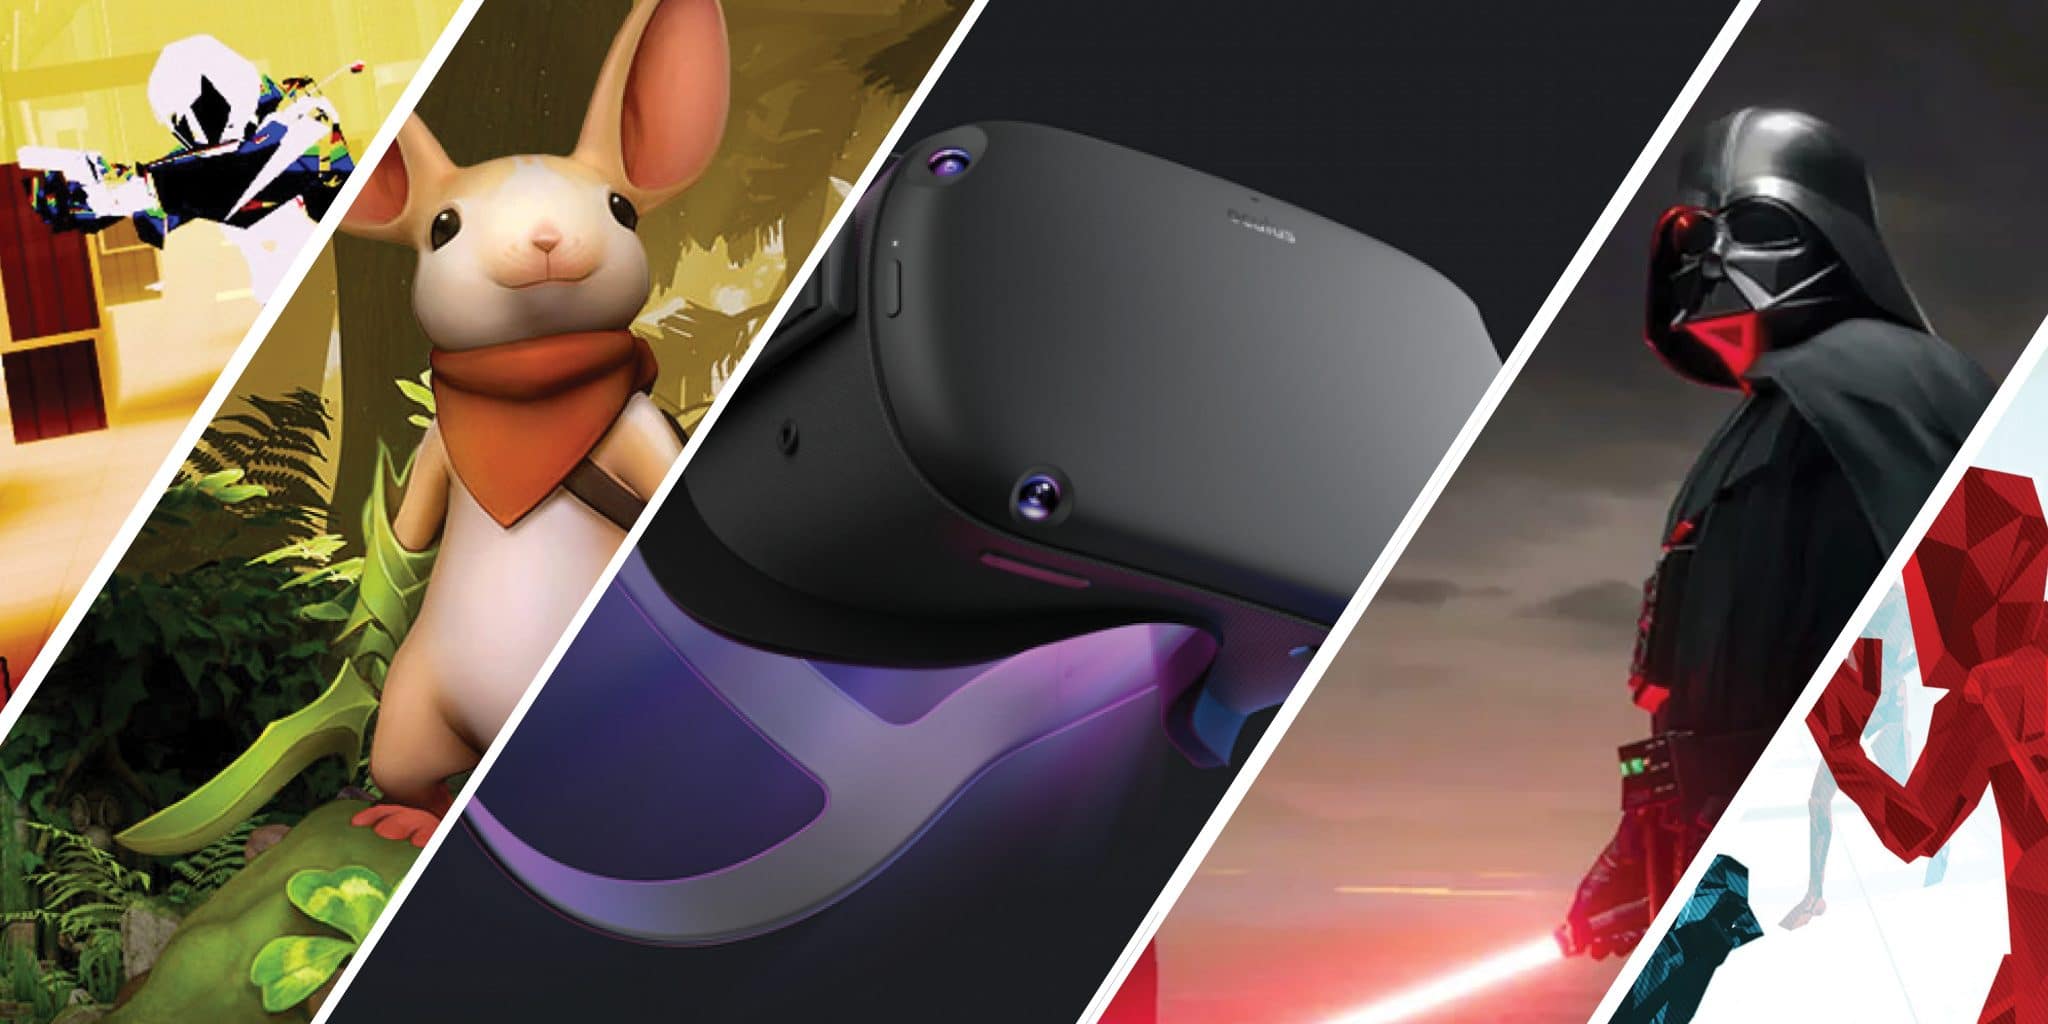 oculus quest games coming out